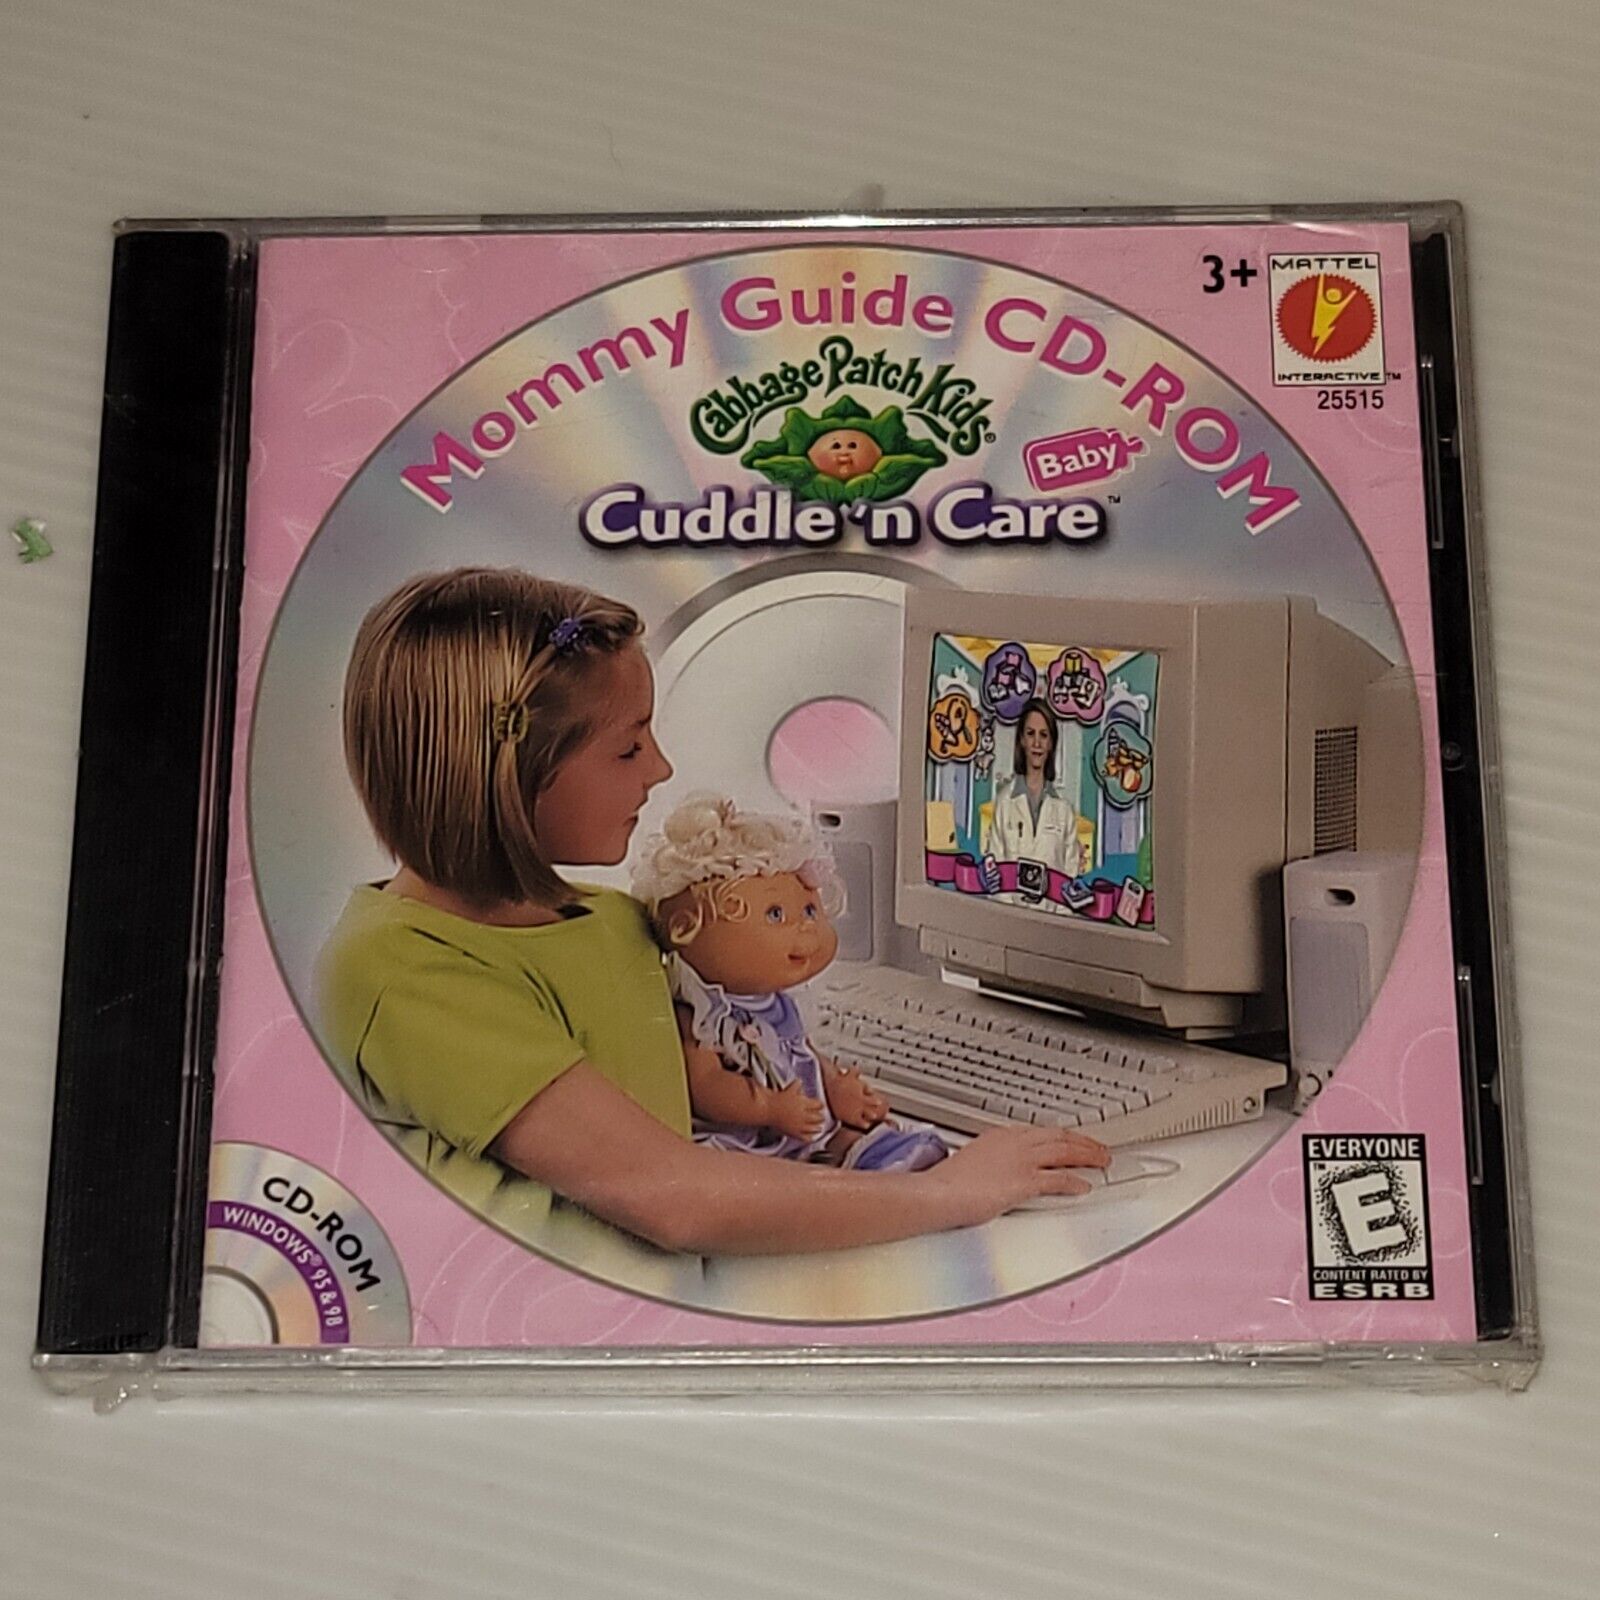 Cabbage Patch Kids Mommy Guide CD-ROM For Cuddle n Care